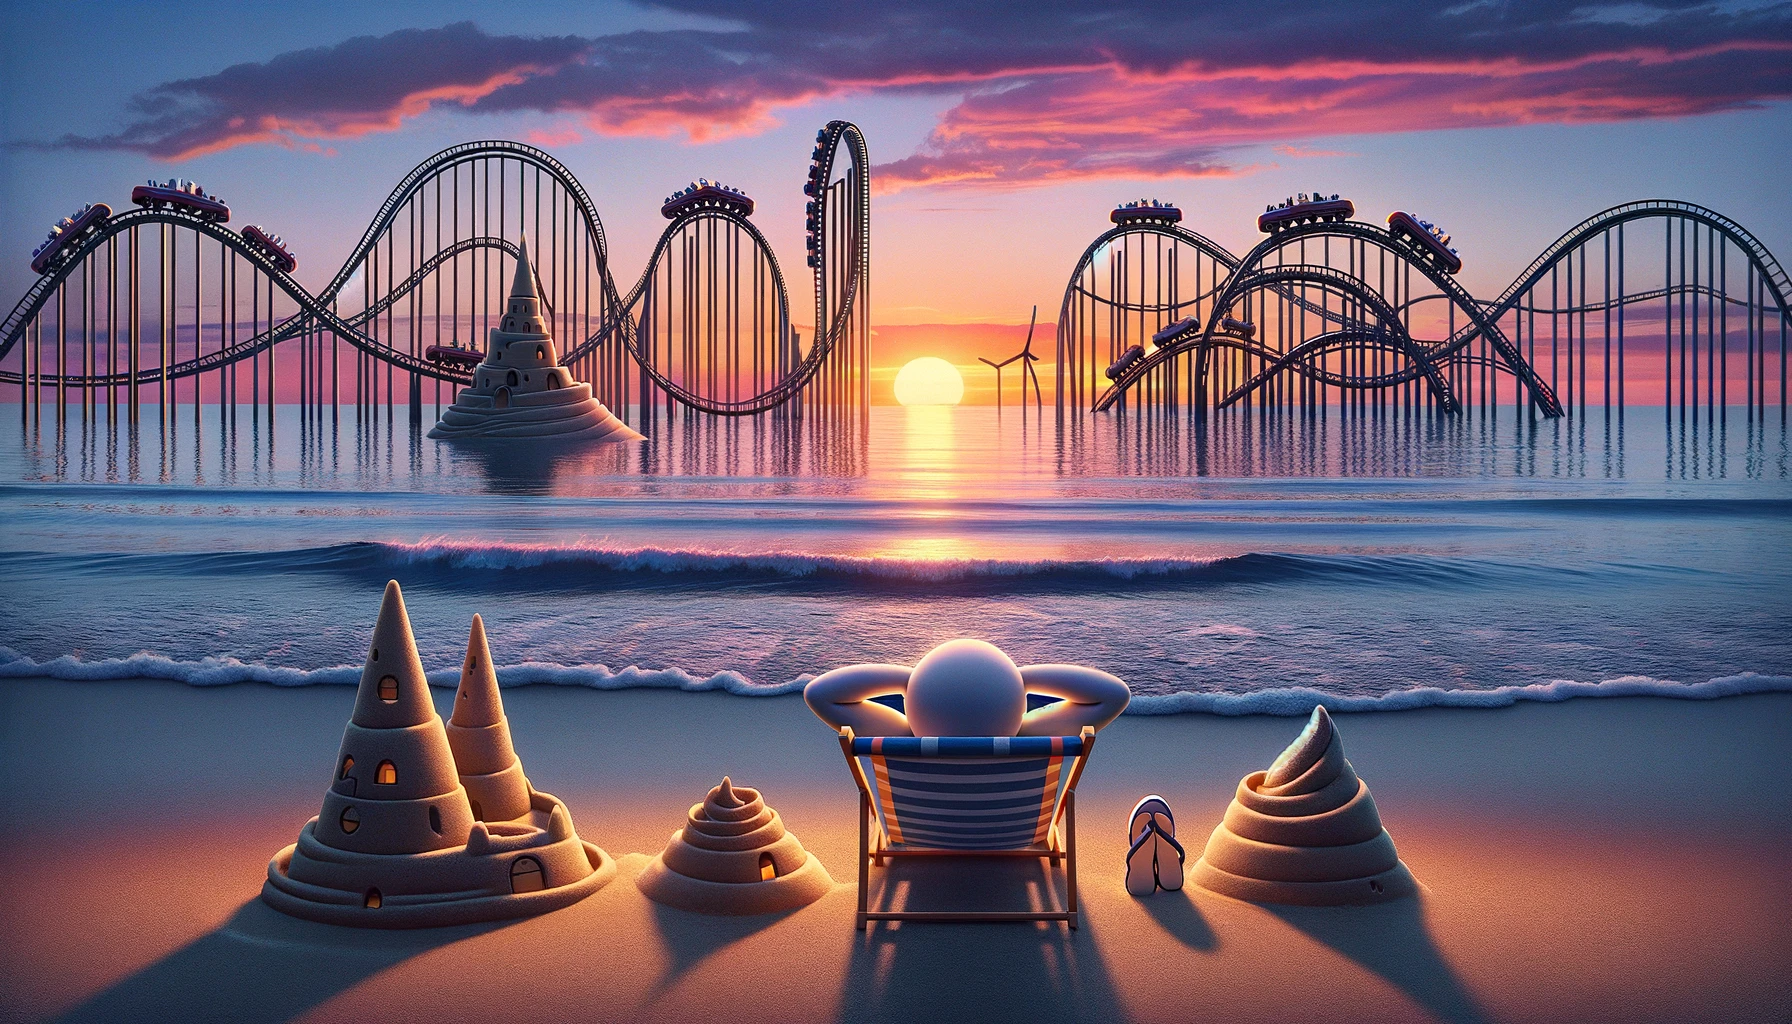 After a roller coaster day, a peaceful dusk at the beach seems heavenly. - Roller Coaster Pun